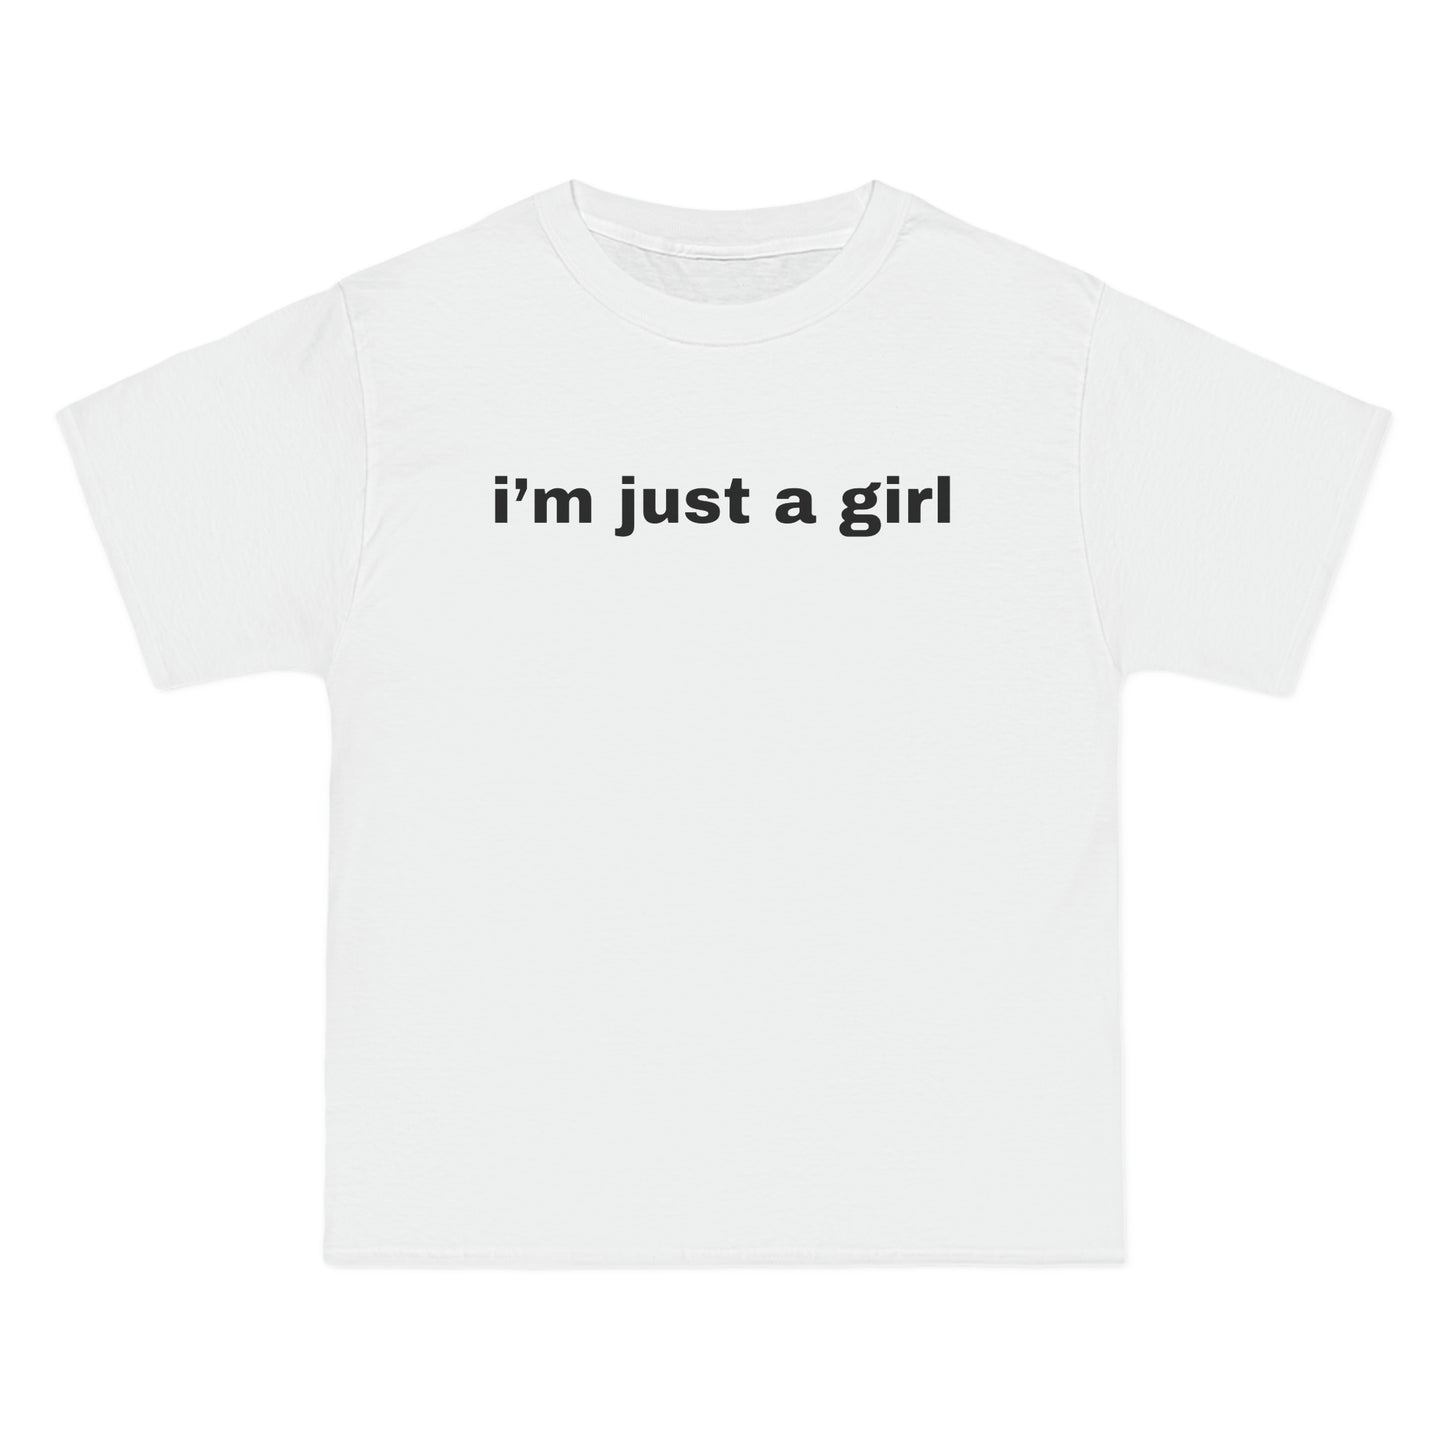 i'm just a girl Tee